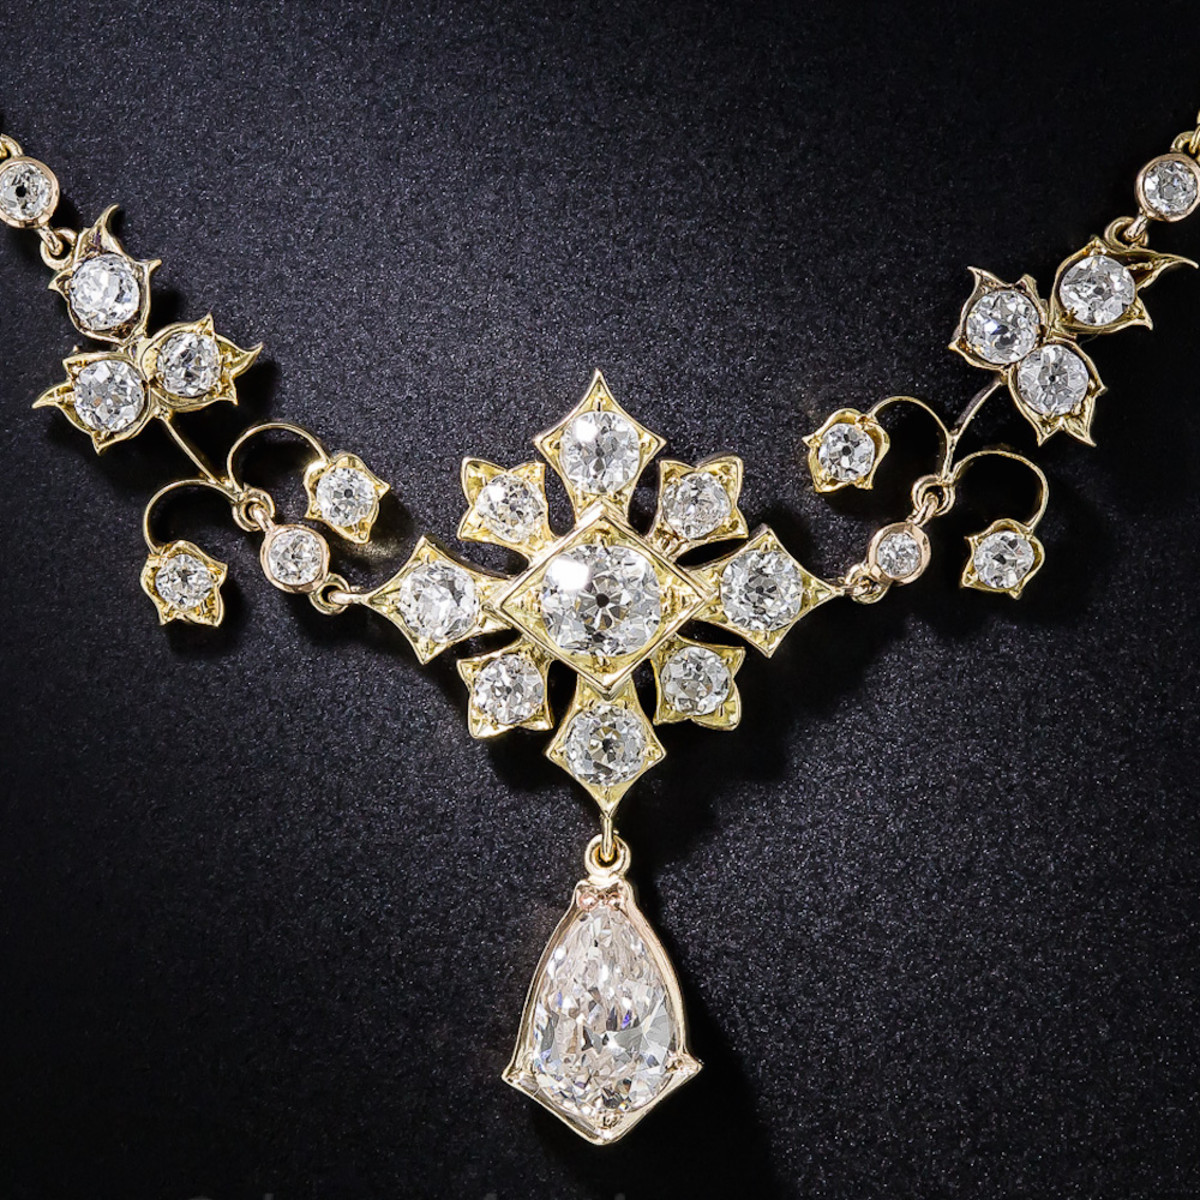 The Most Beautiful Jewelry In The World | HubPages